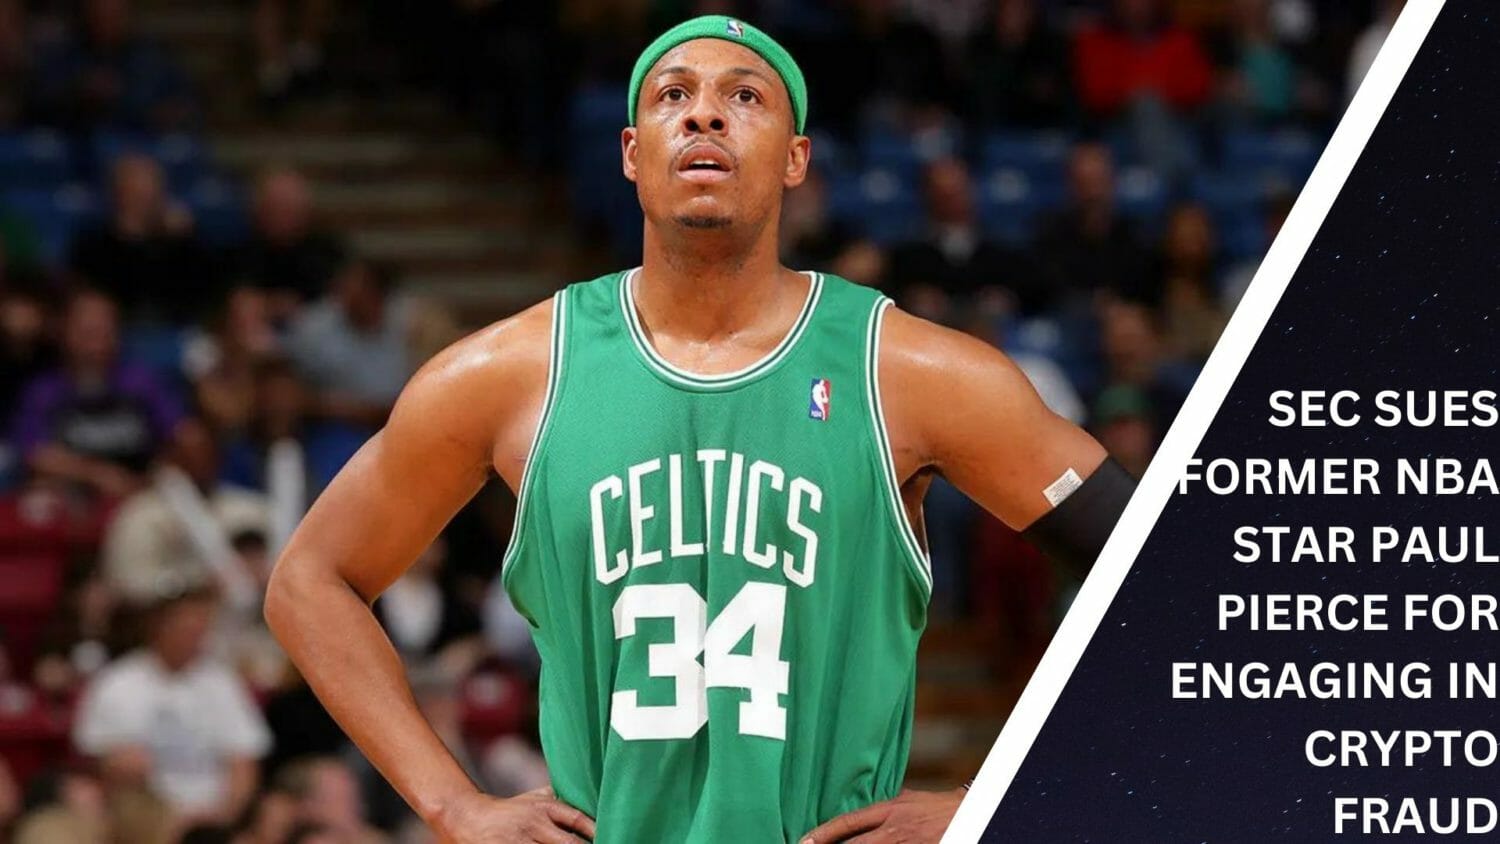 Sec Sues Former Nba Star Paul Pierce For Engaging In Crypto Fraud